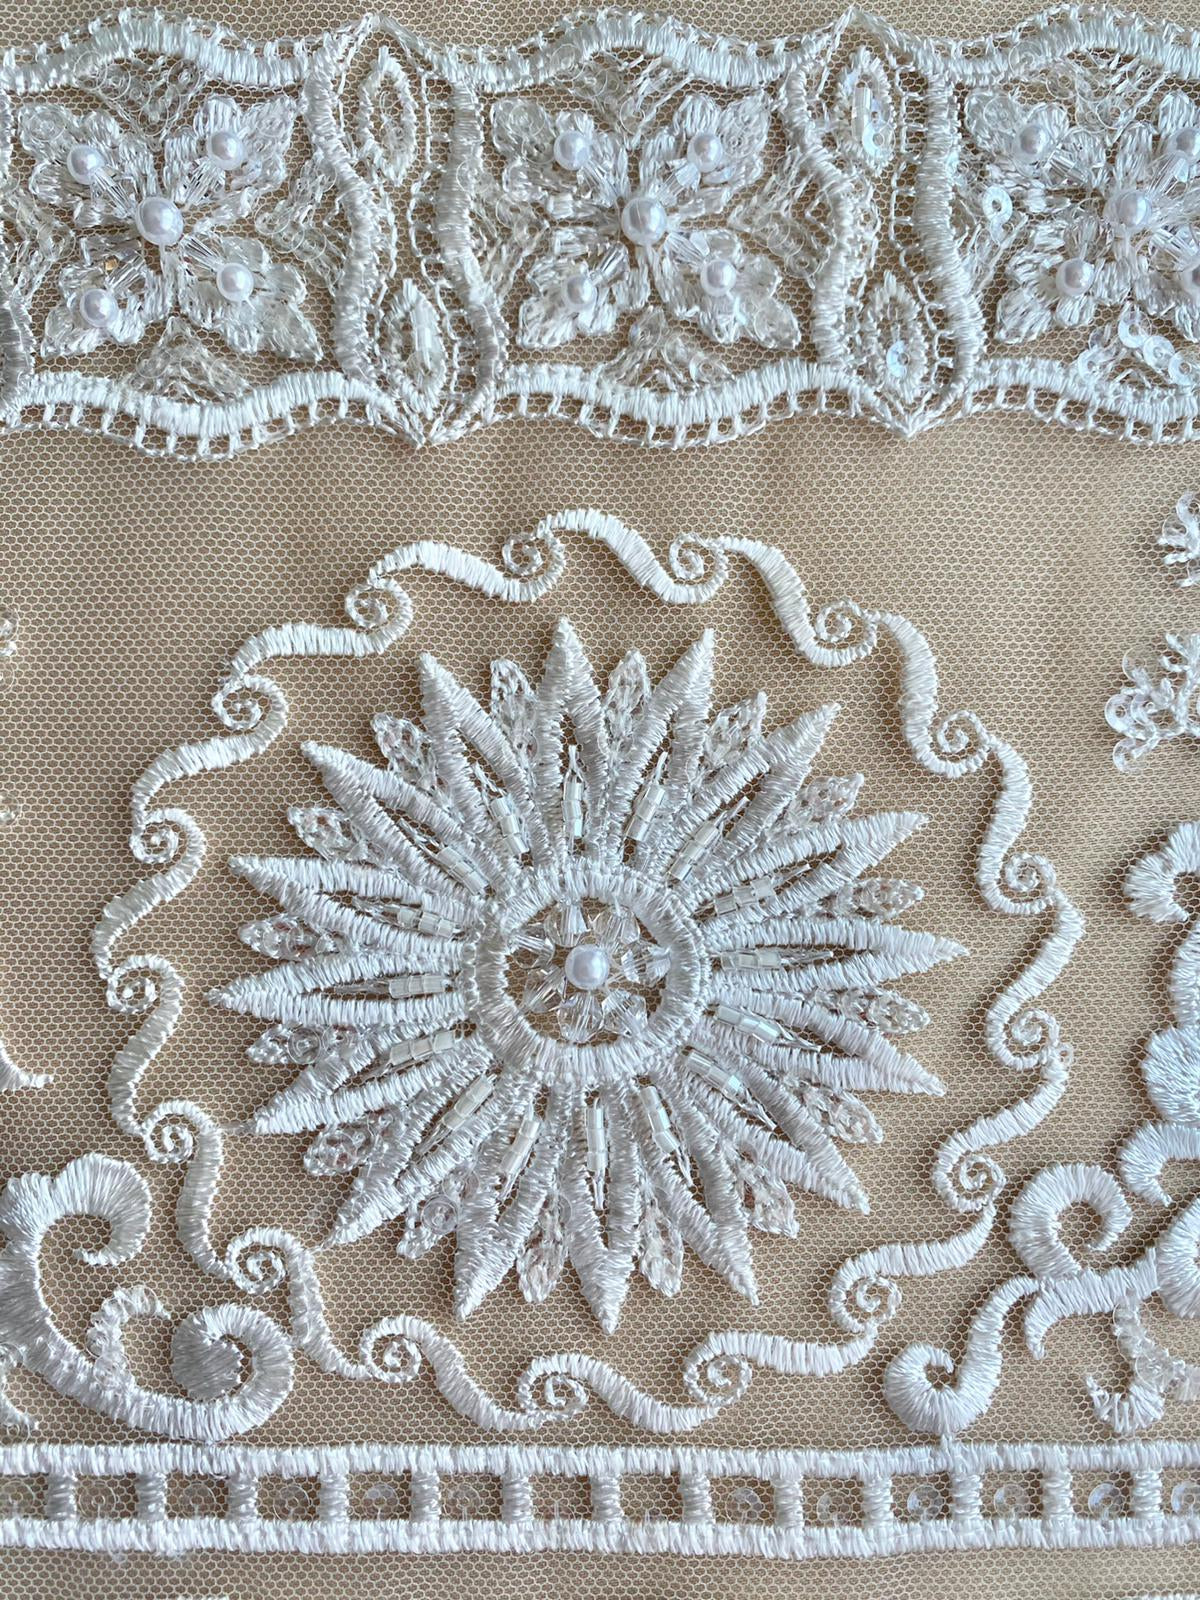 Lace with Floral Pattern, with Crystals, Pearls and Sequins